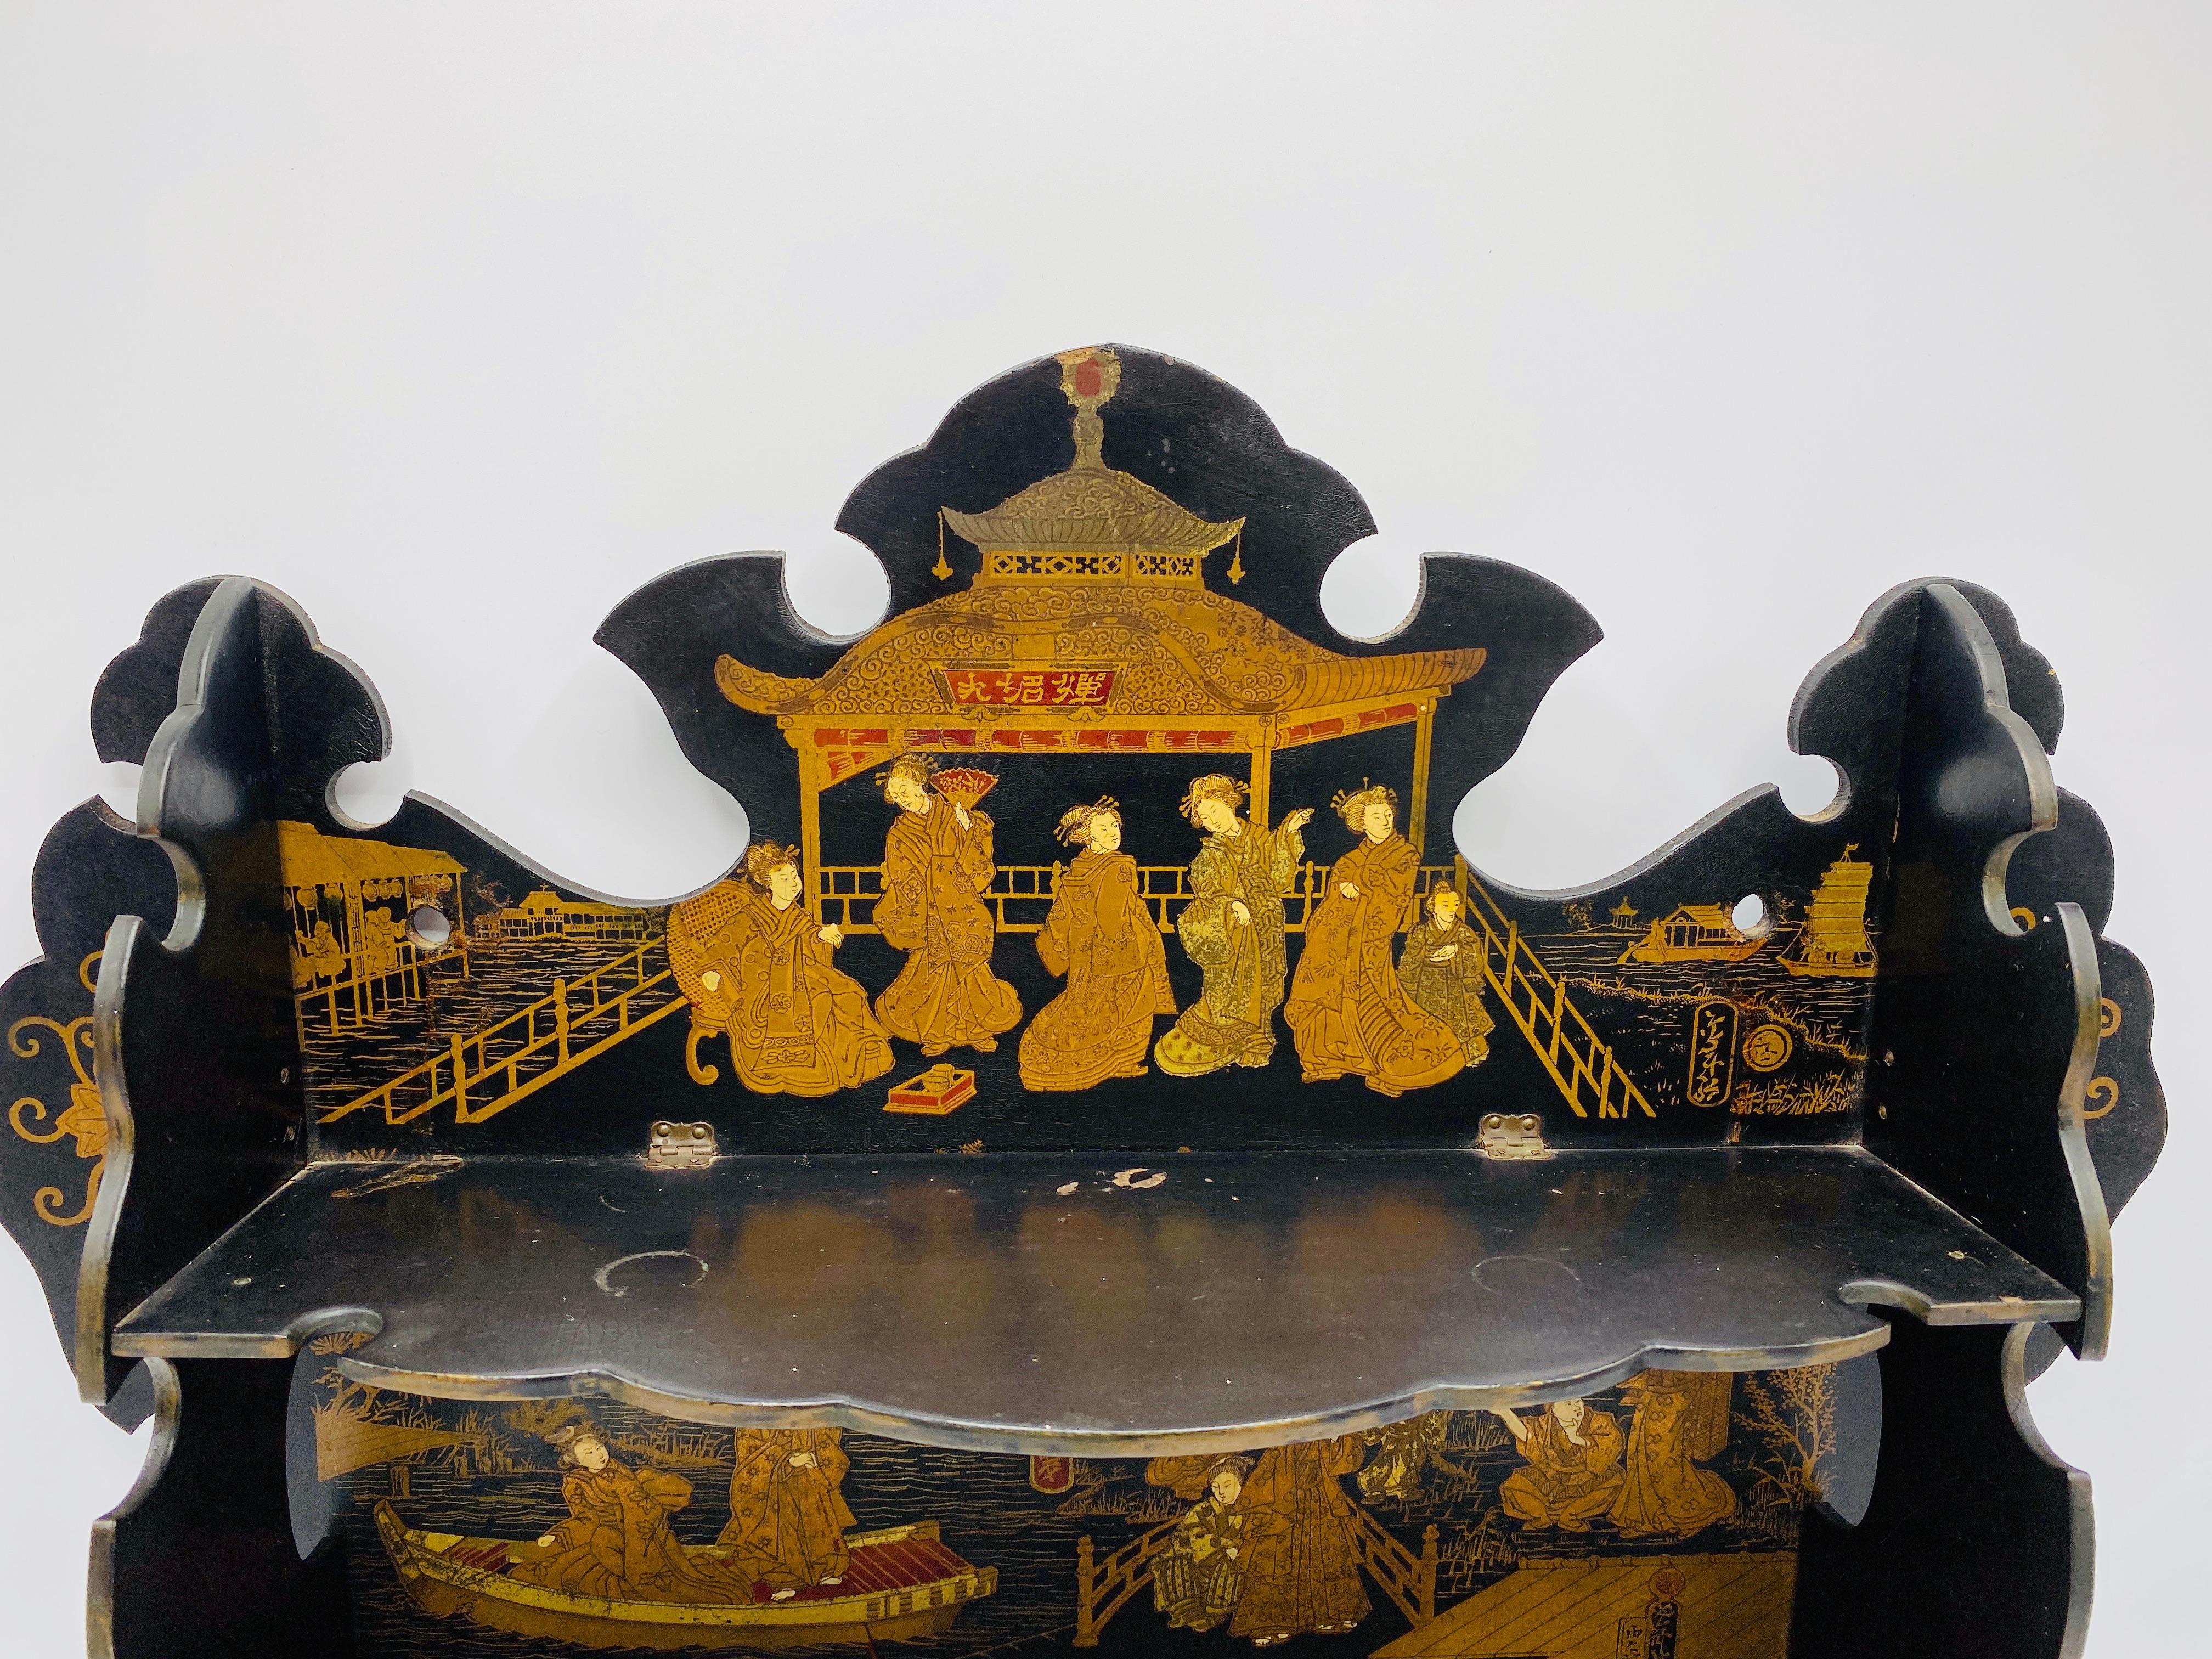 Offered is an absolutely stunning, late 19th century French, chinoiserie papier mâché japanned-lacquered pagoda shelf. The piece can hang with nails from two small holes (in upper portion) or sit freestanding on a flat surface. Four sets of